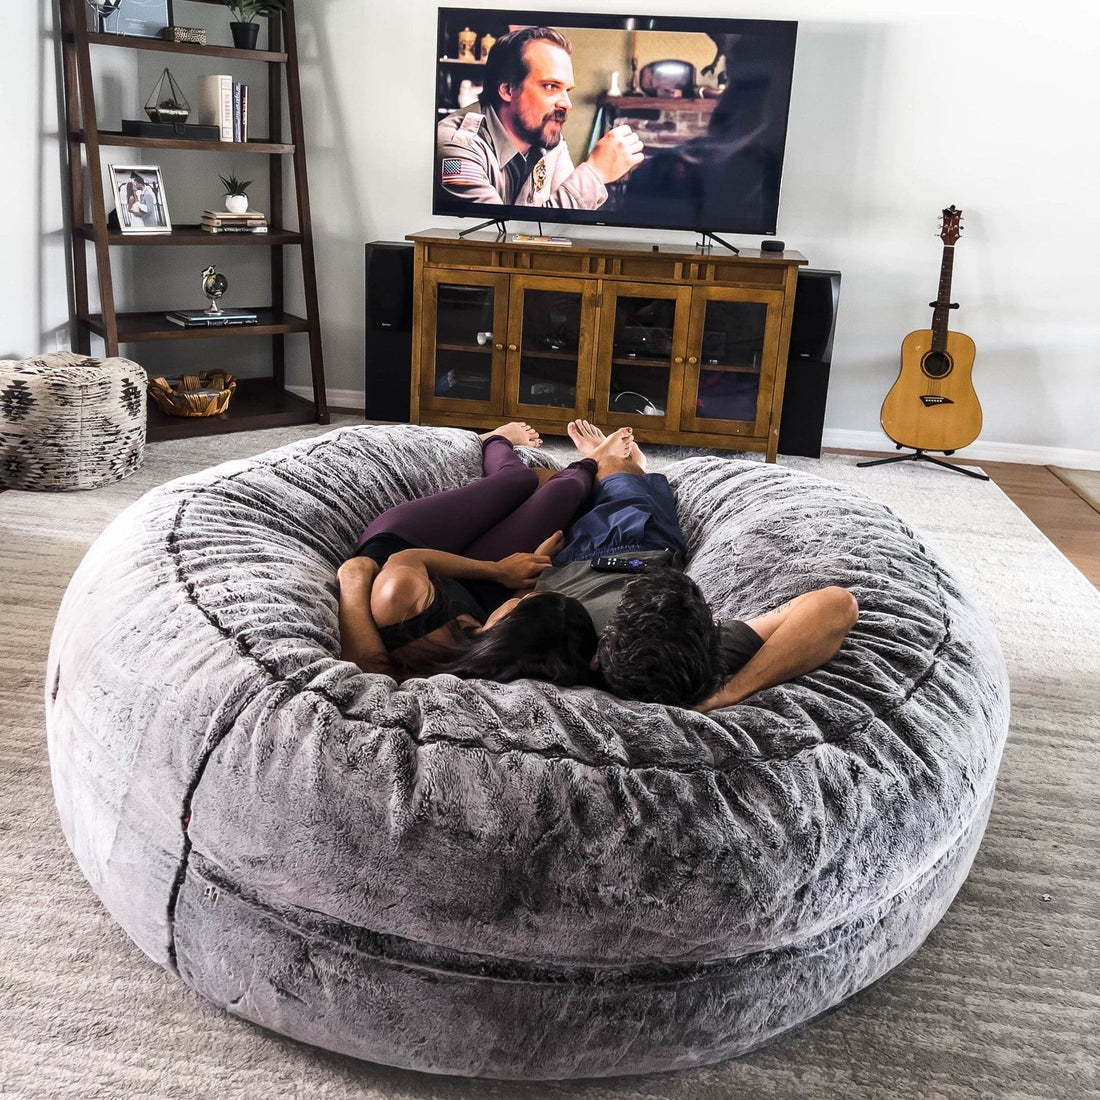 Giant Bean Bag Chair Cover Soft Fluffy Faux Fur Lazy Sofa Bed Cover Living  Room | eBay